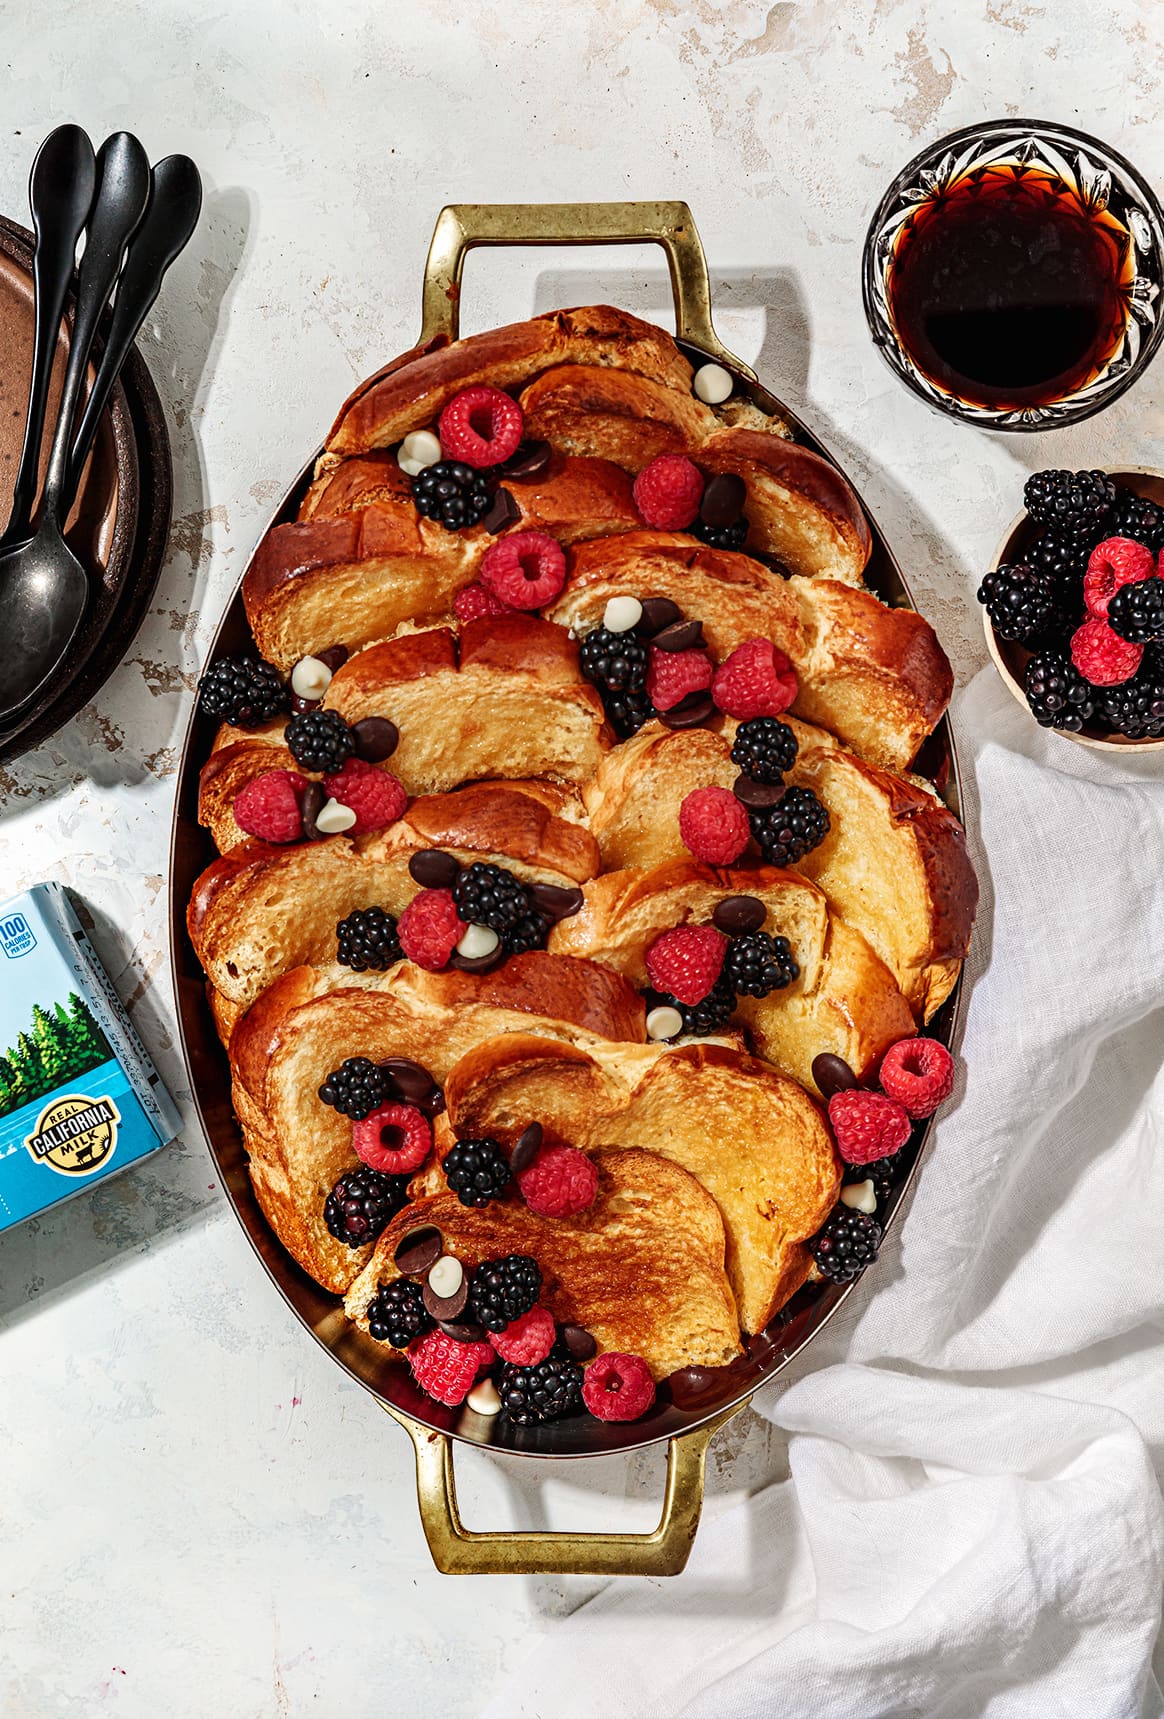 Treat your family to this Chocolate and Raspberry French Toast Bake aka the most delicious holiday breakfast tradition. Serve warm with a drizzle of maple syrup.